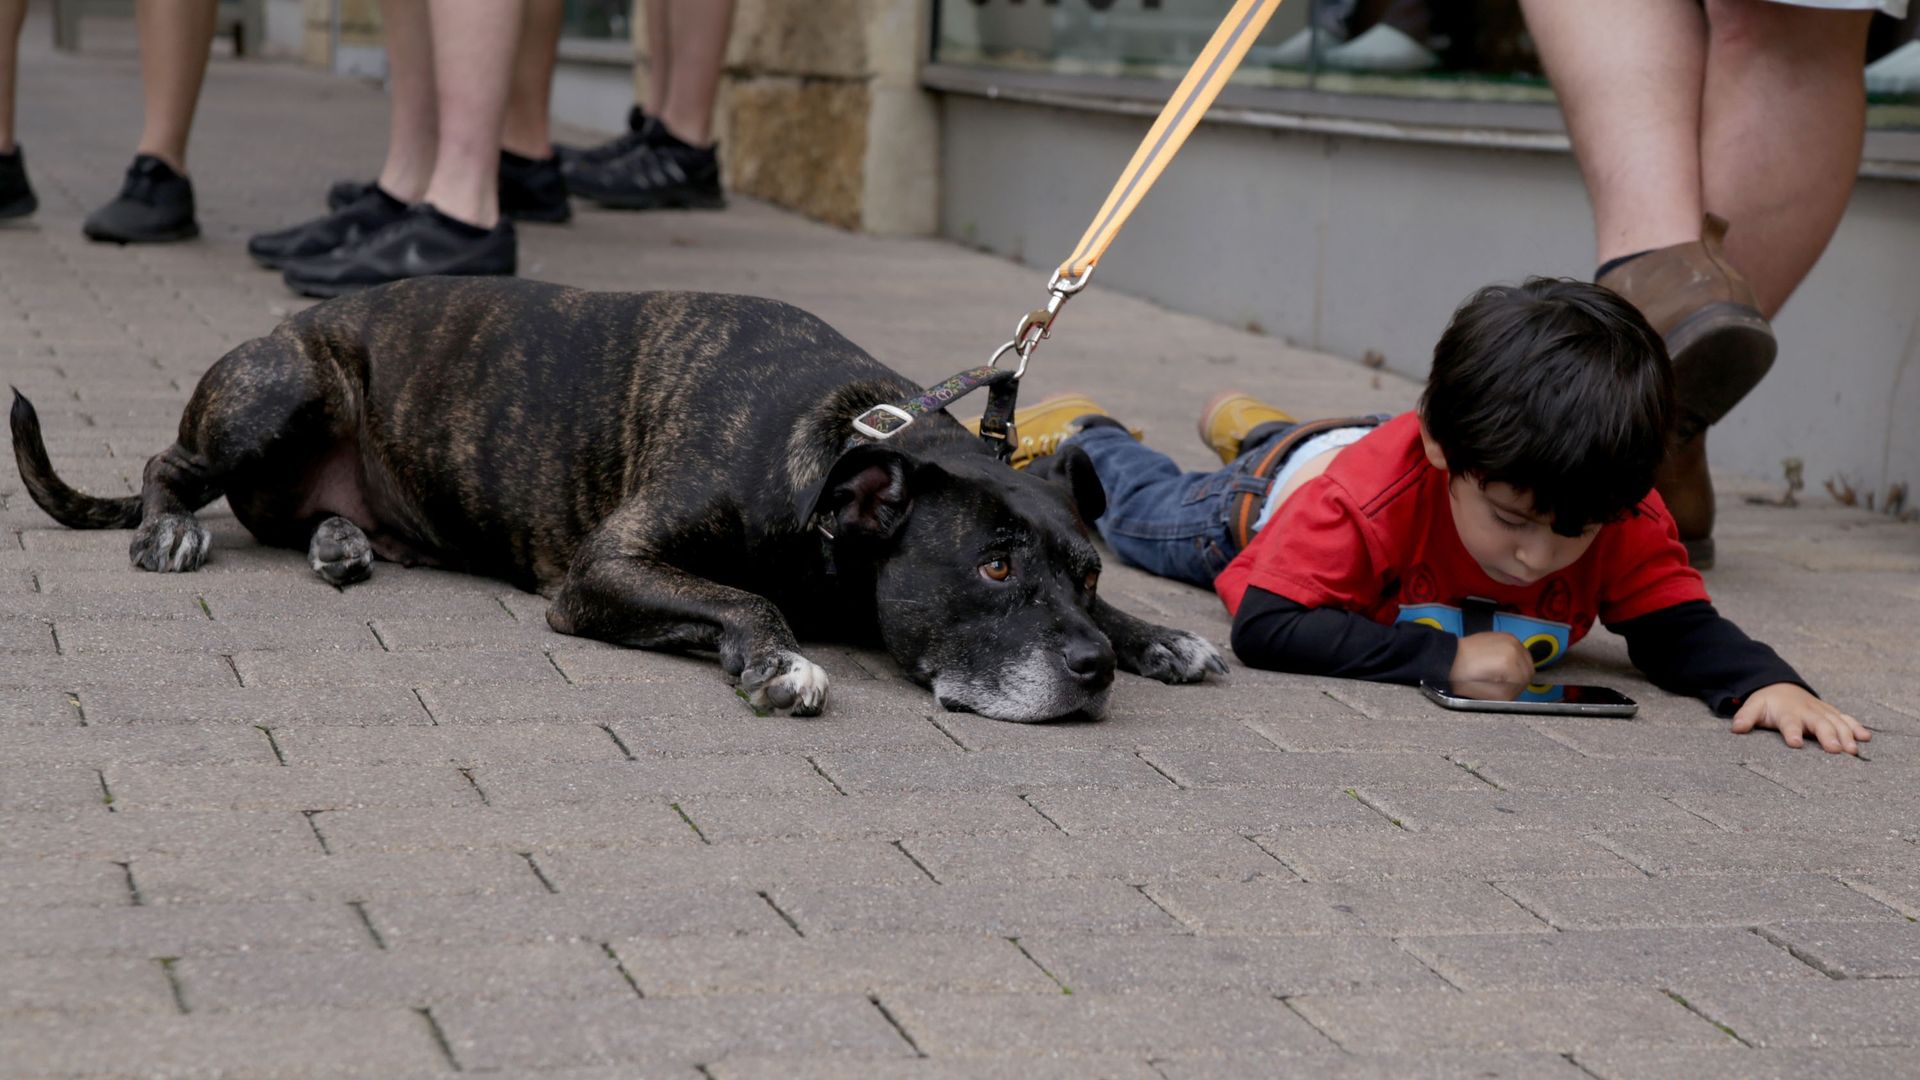 A photo of a dog lying on the ground next to a child.